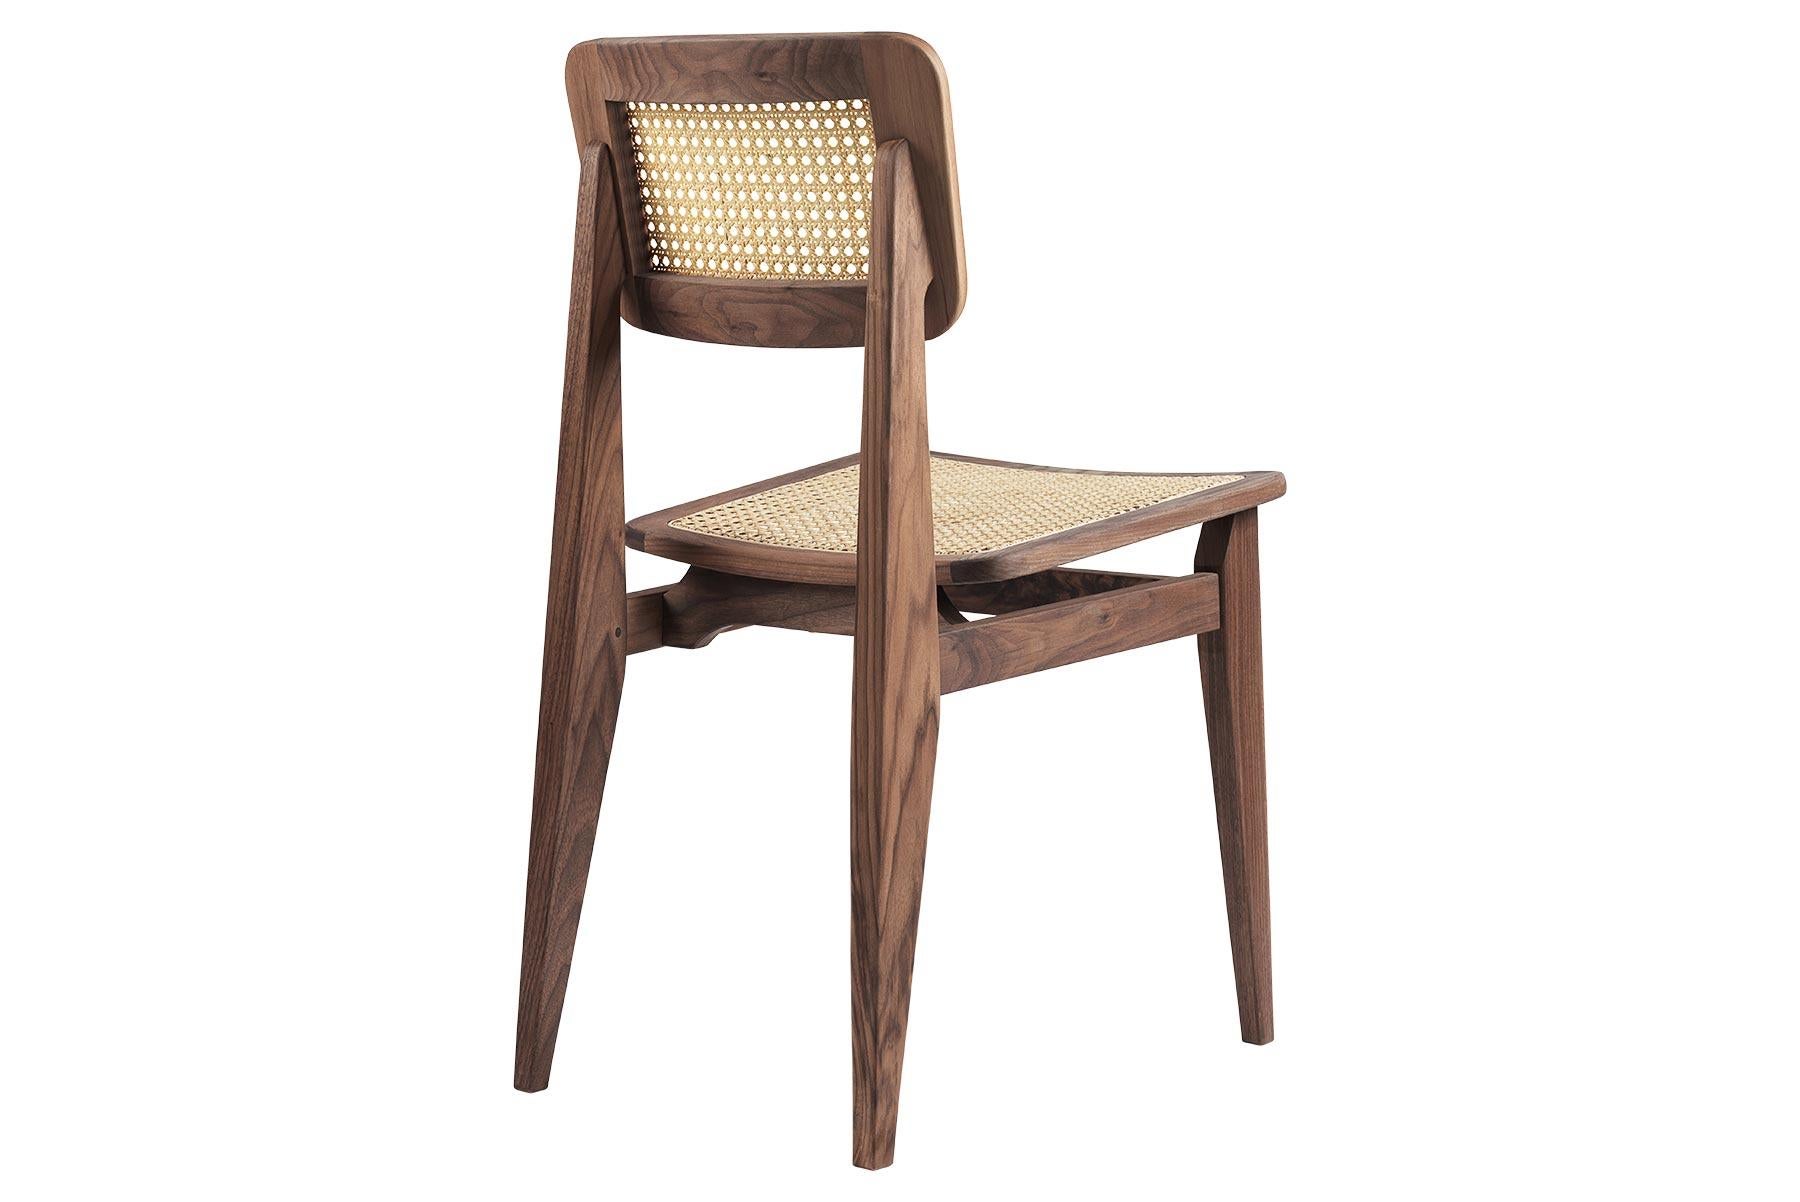 Mid-Century Modern C-Chair Dining Chair, French Cane, Brown Stained Oak - Set of 8